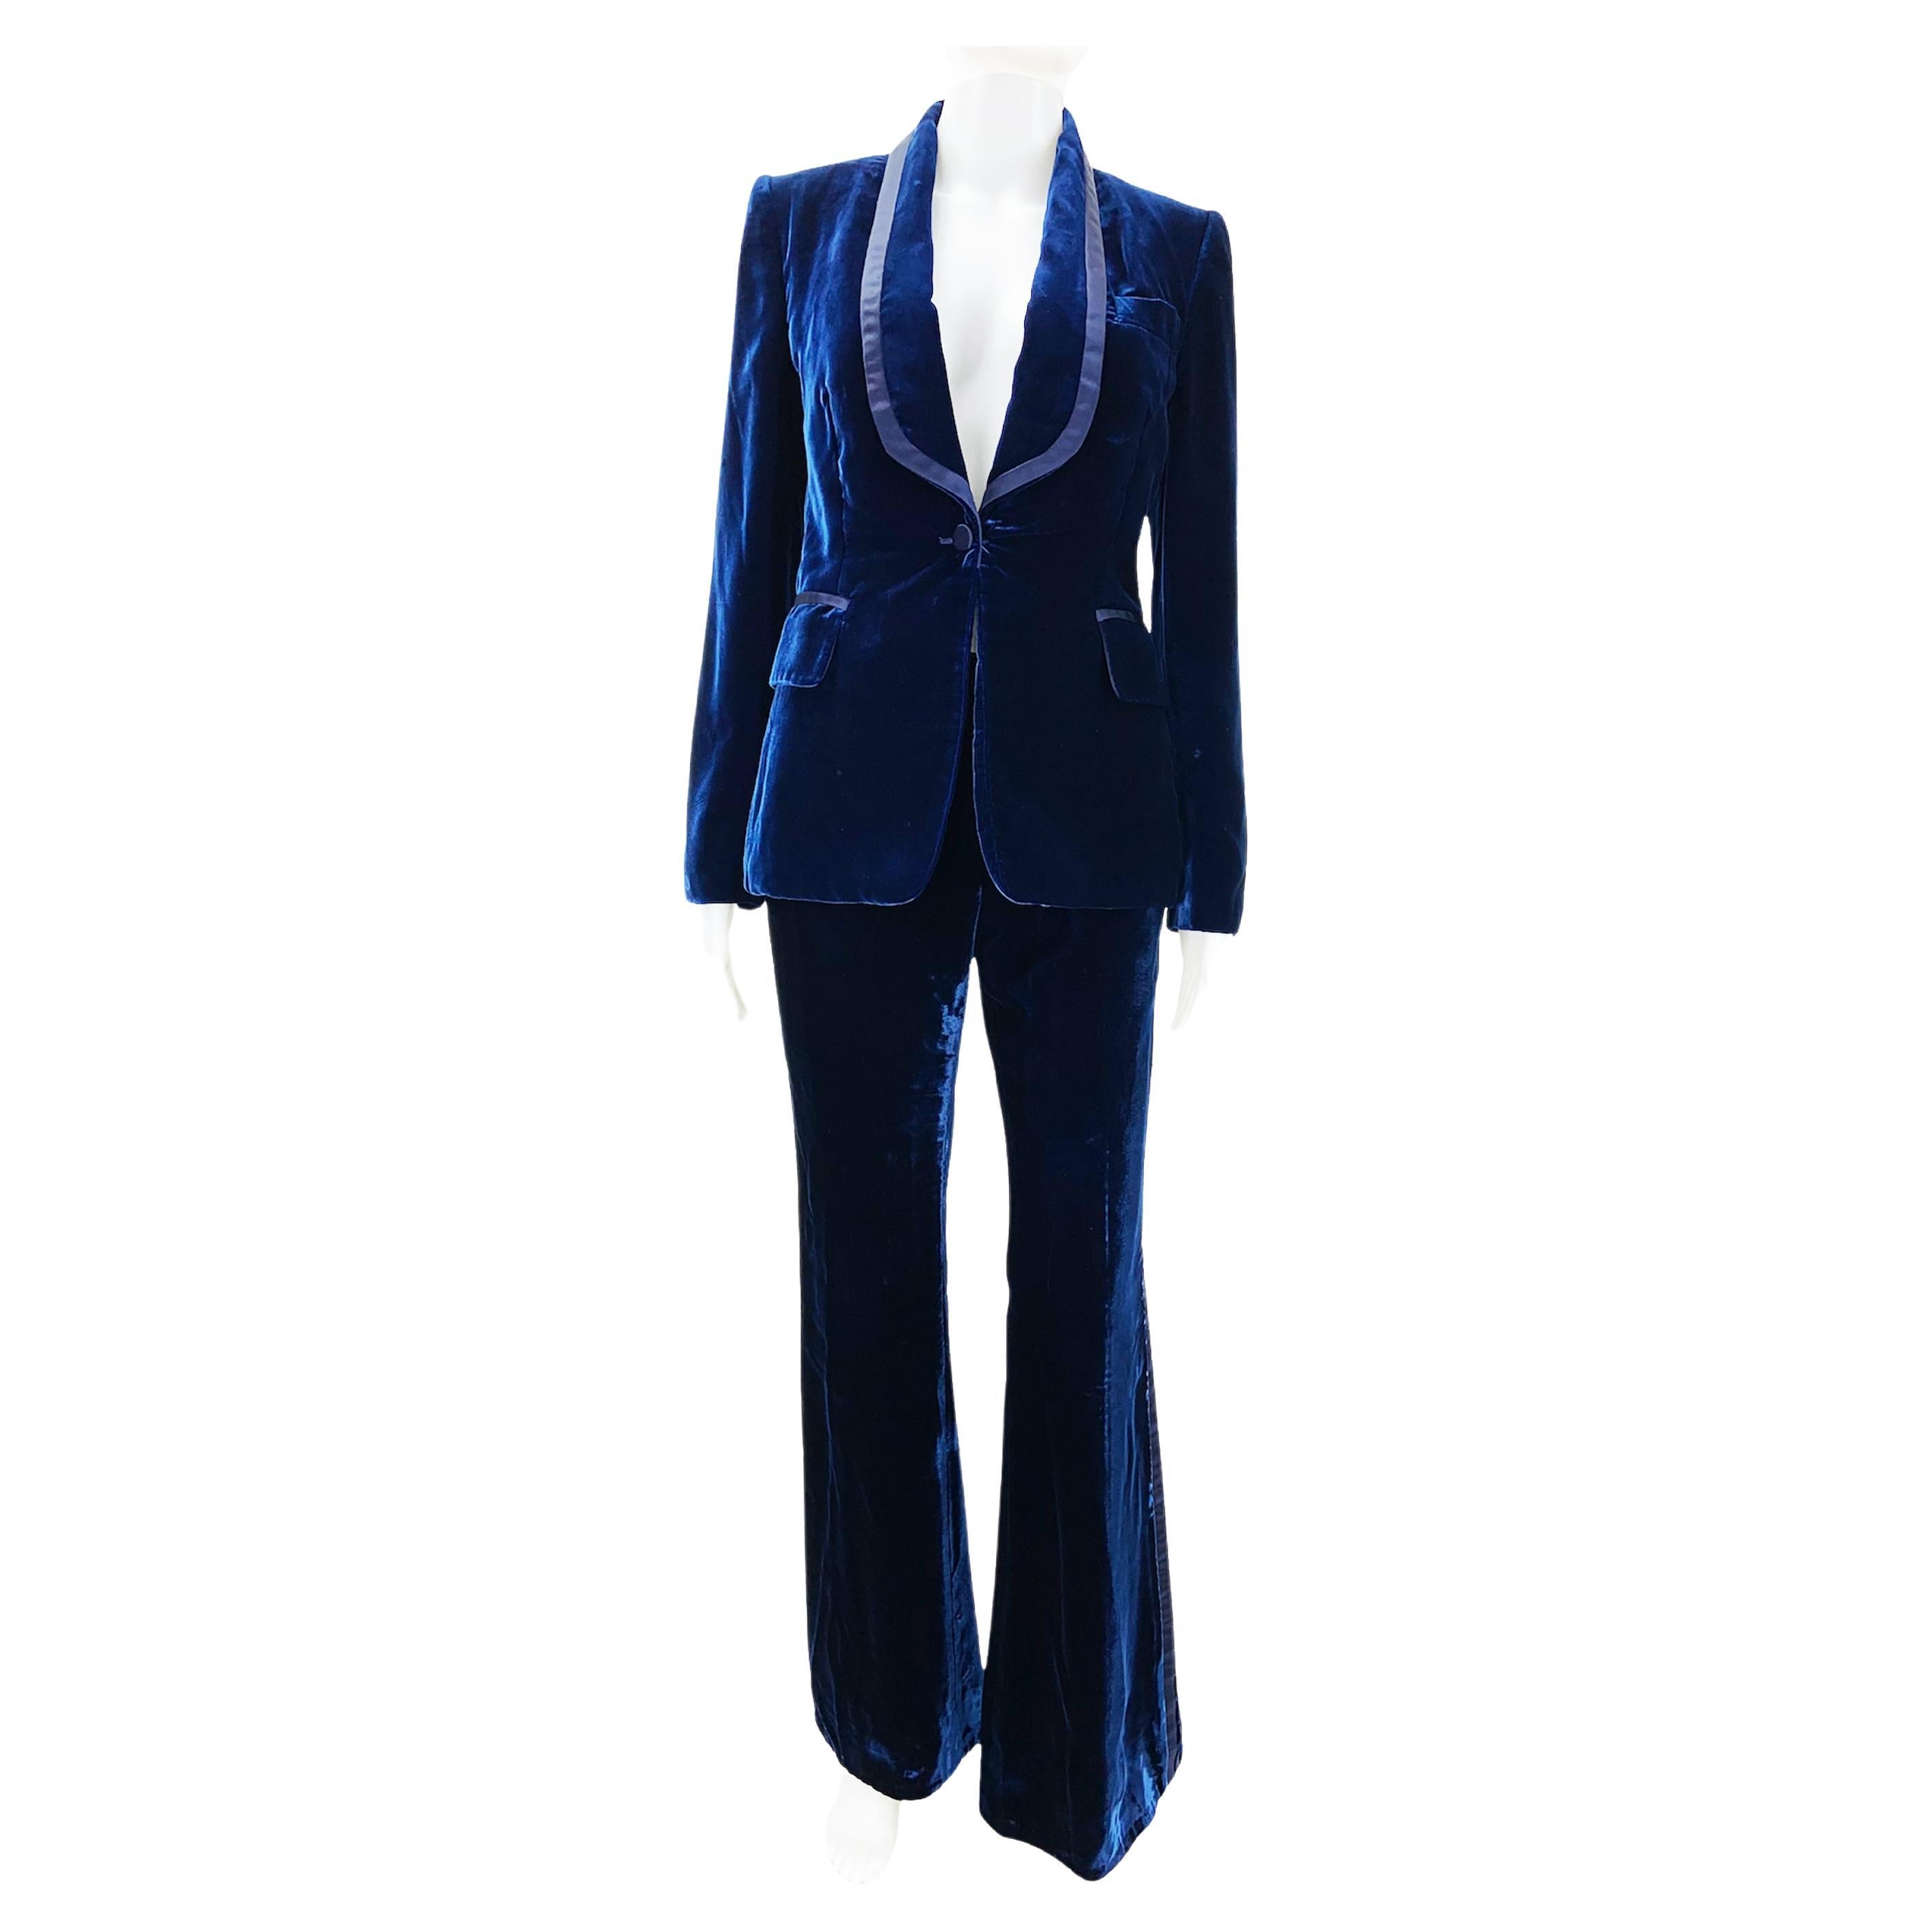 Iconic Tom Ford for Gucci Runway FW 2004 Blue Velvet Tuxedo Pant Suit It 38